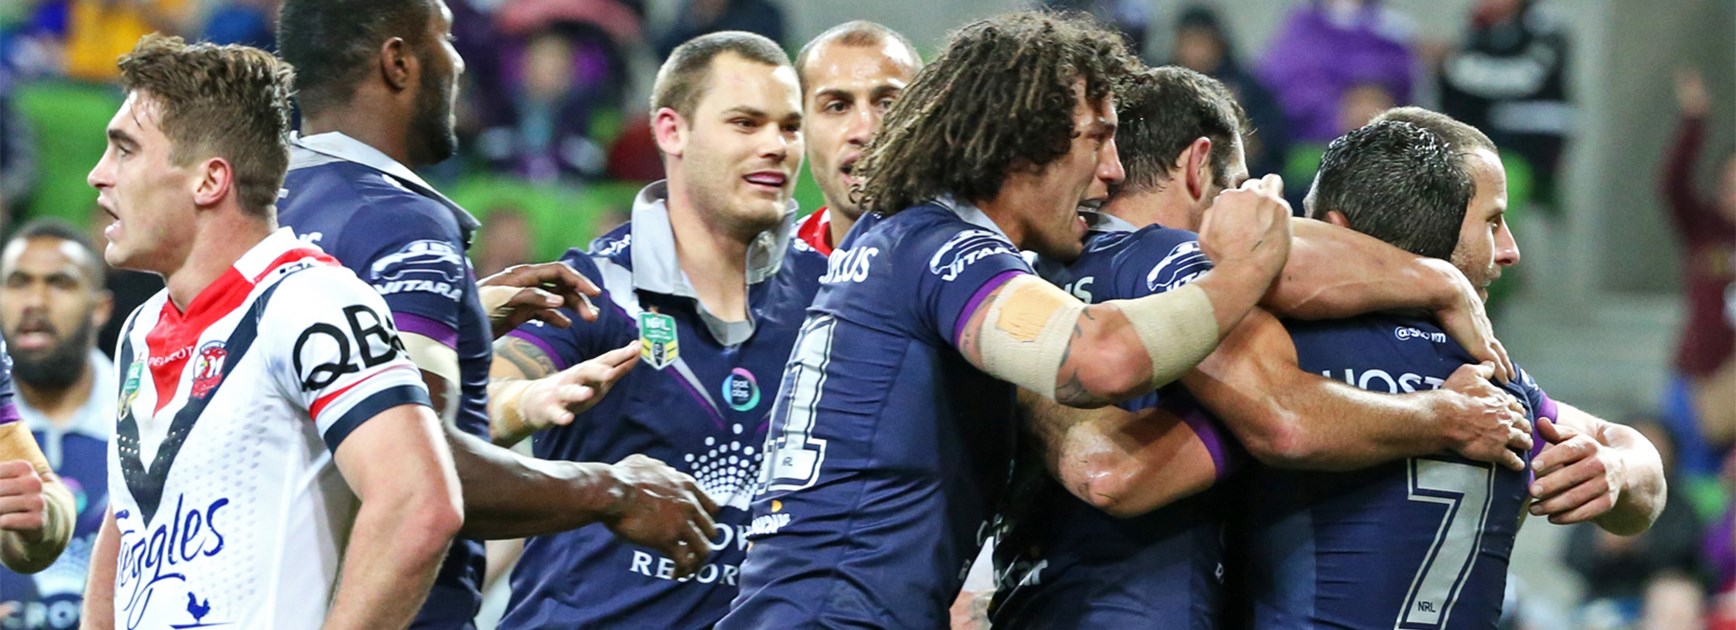 The Melbourne Storm celebrate a try against the Roosters on Saturday night.